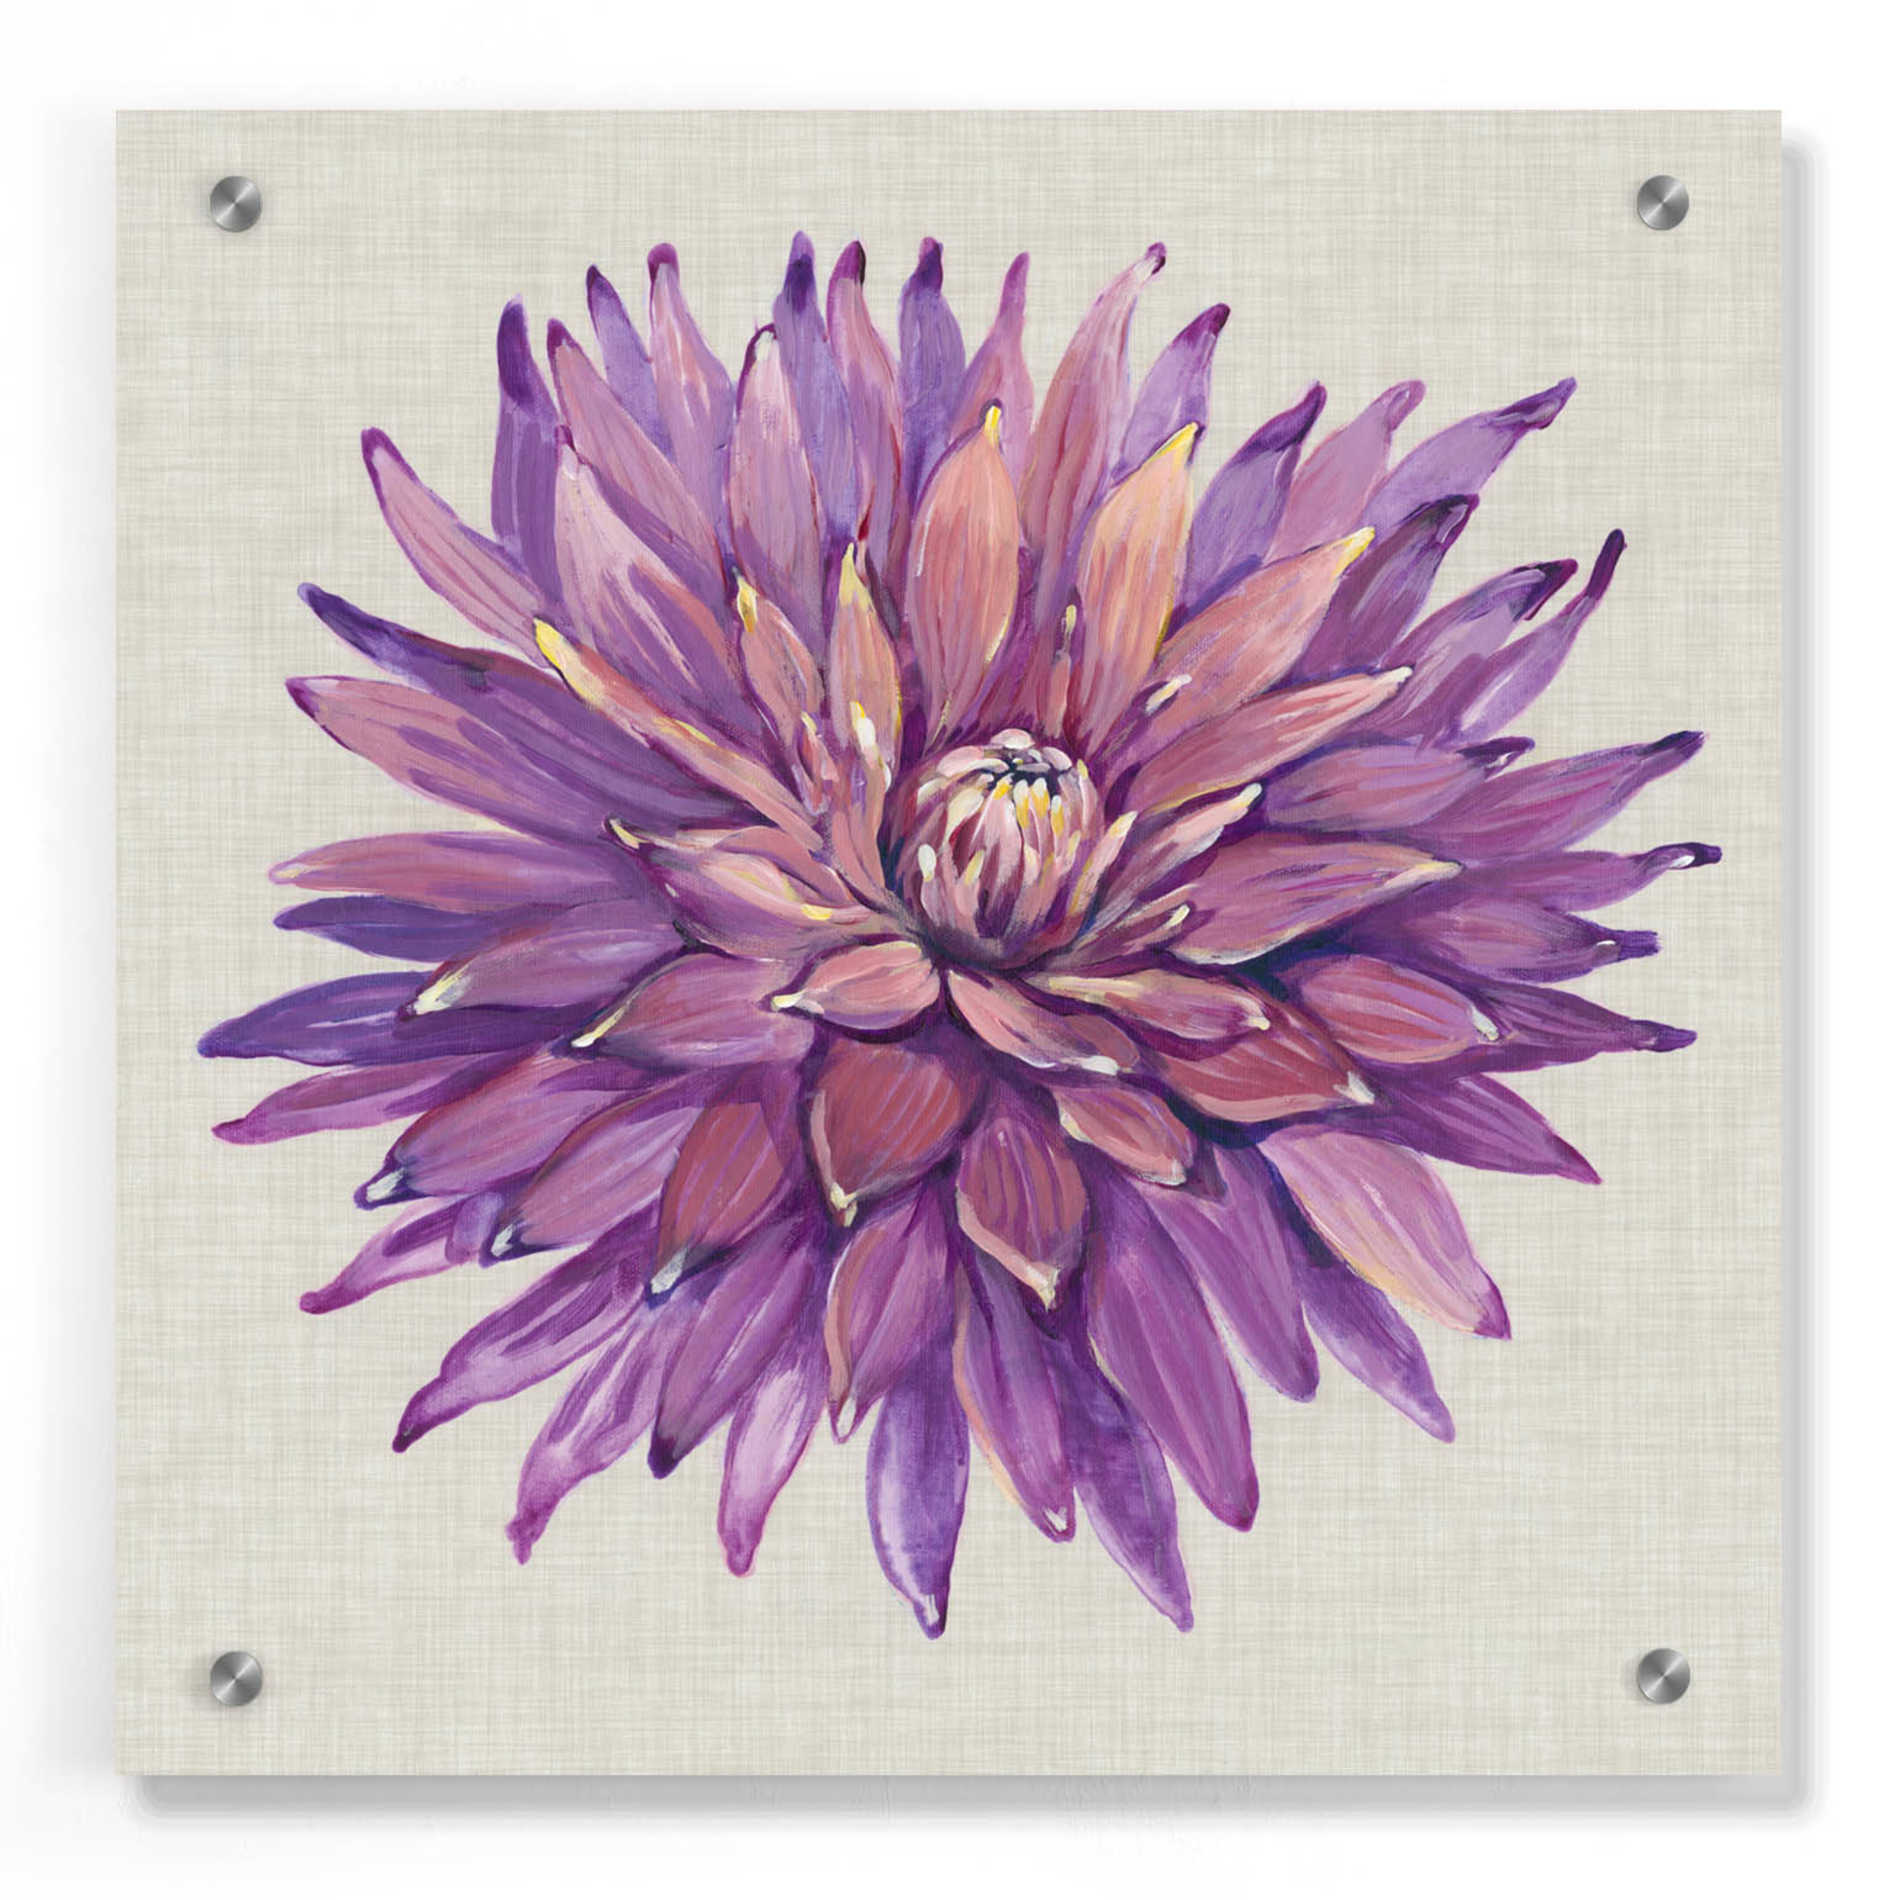 Epic Art 'Floral Portrait on Linen II' by Tim O'Toole, Acrylic Glass Wall Art,36x36